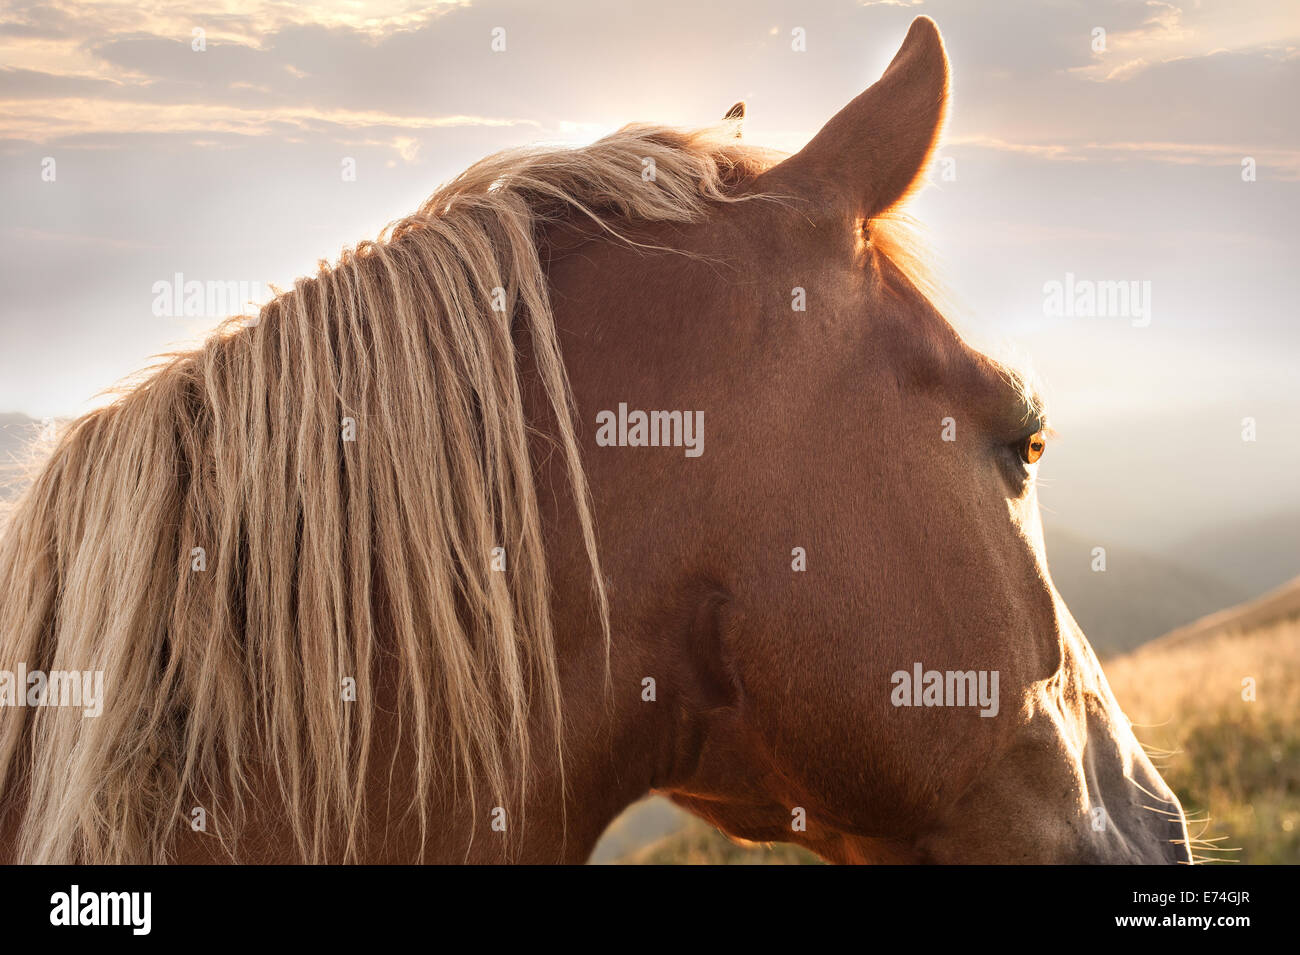 Sunset in mountains nature background. Horse at summer meadow. Image in vintage retro hipster style Stock Photo